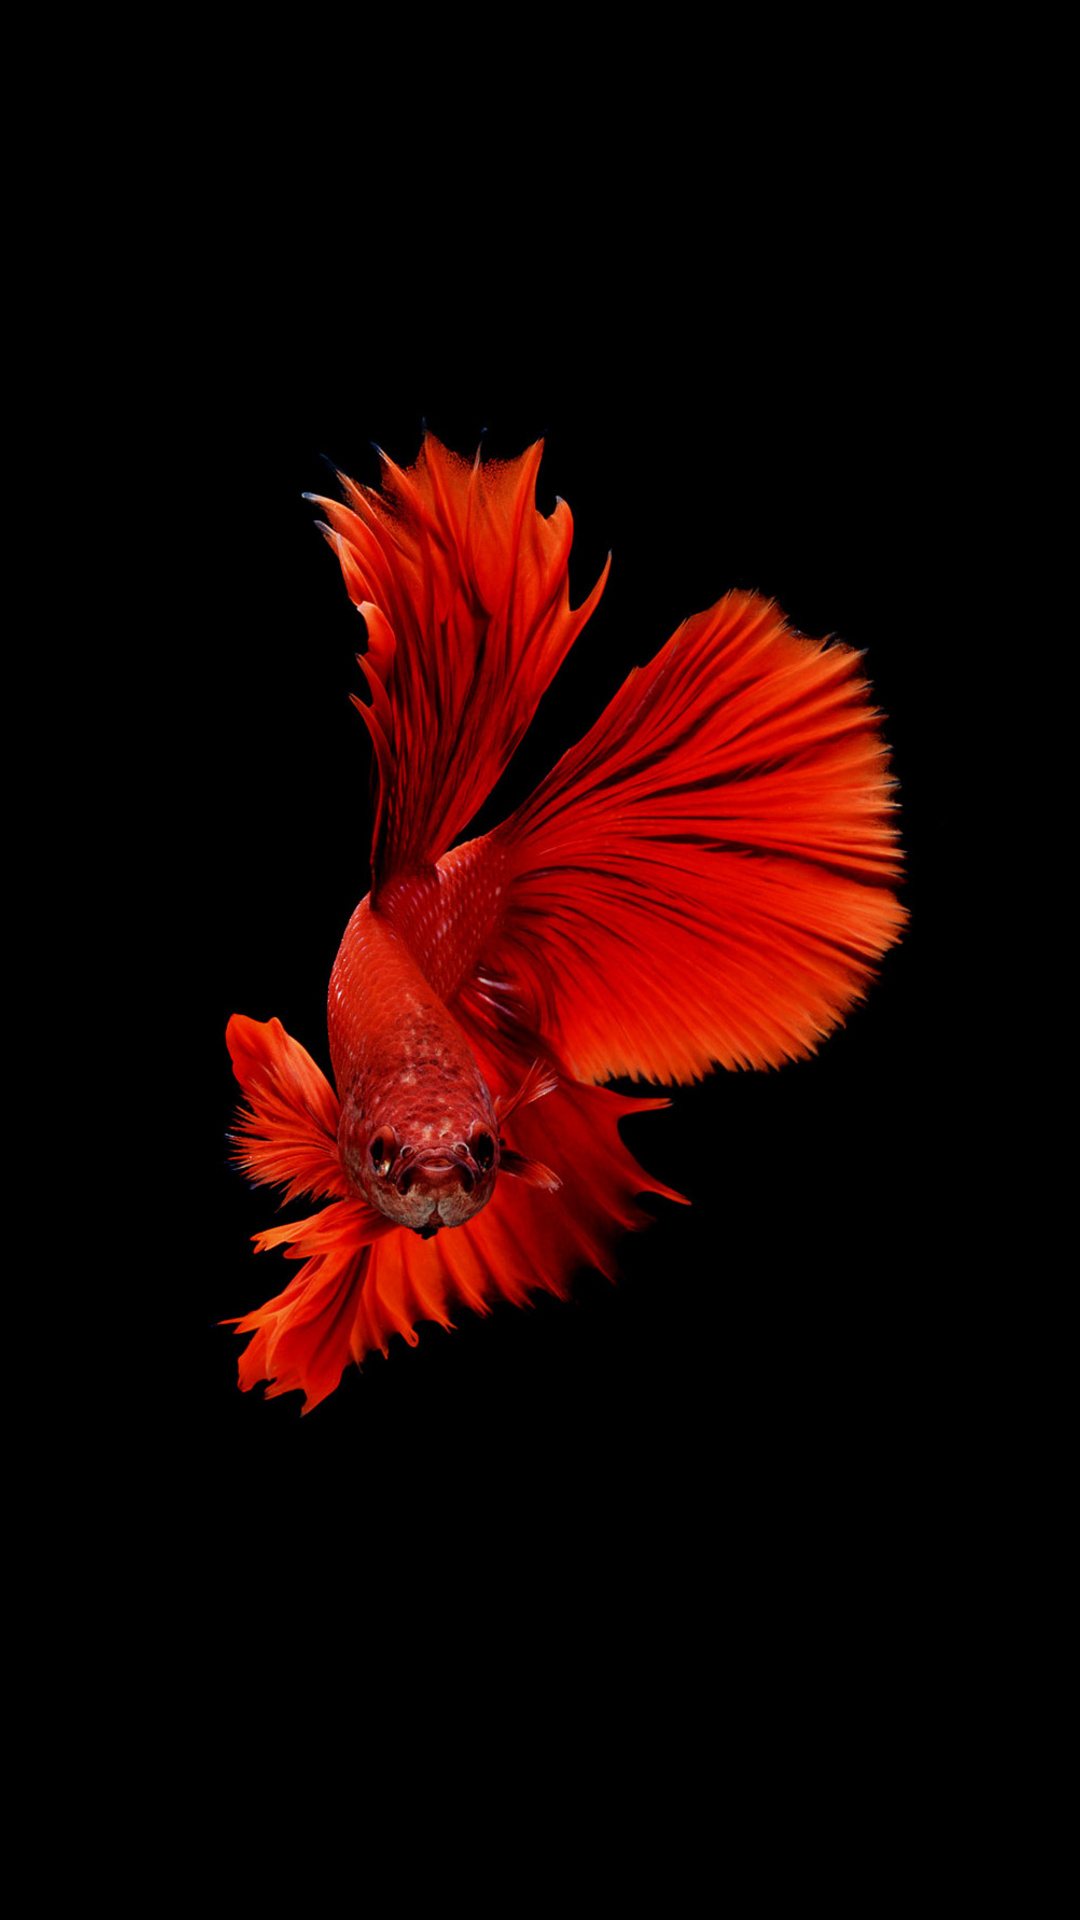 Download 21 iphone-6s-fish-wallpaper Betta-Fish-Wallpaper-,-66 -image-collections-of-wallpapers.jpg